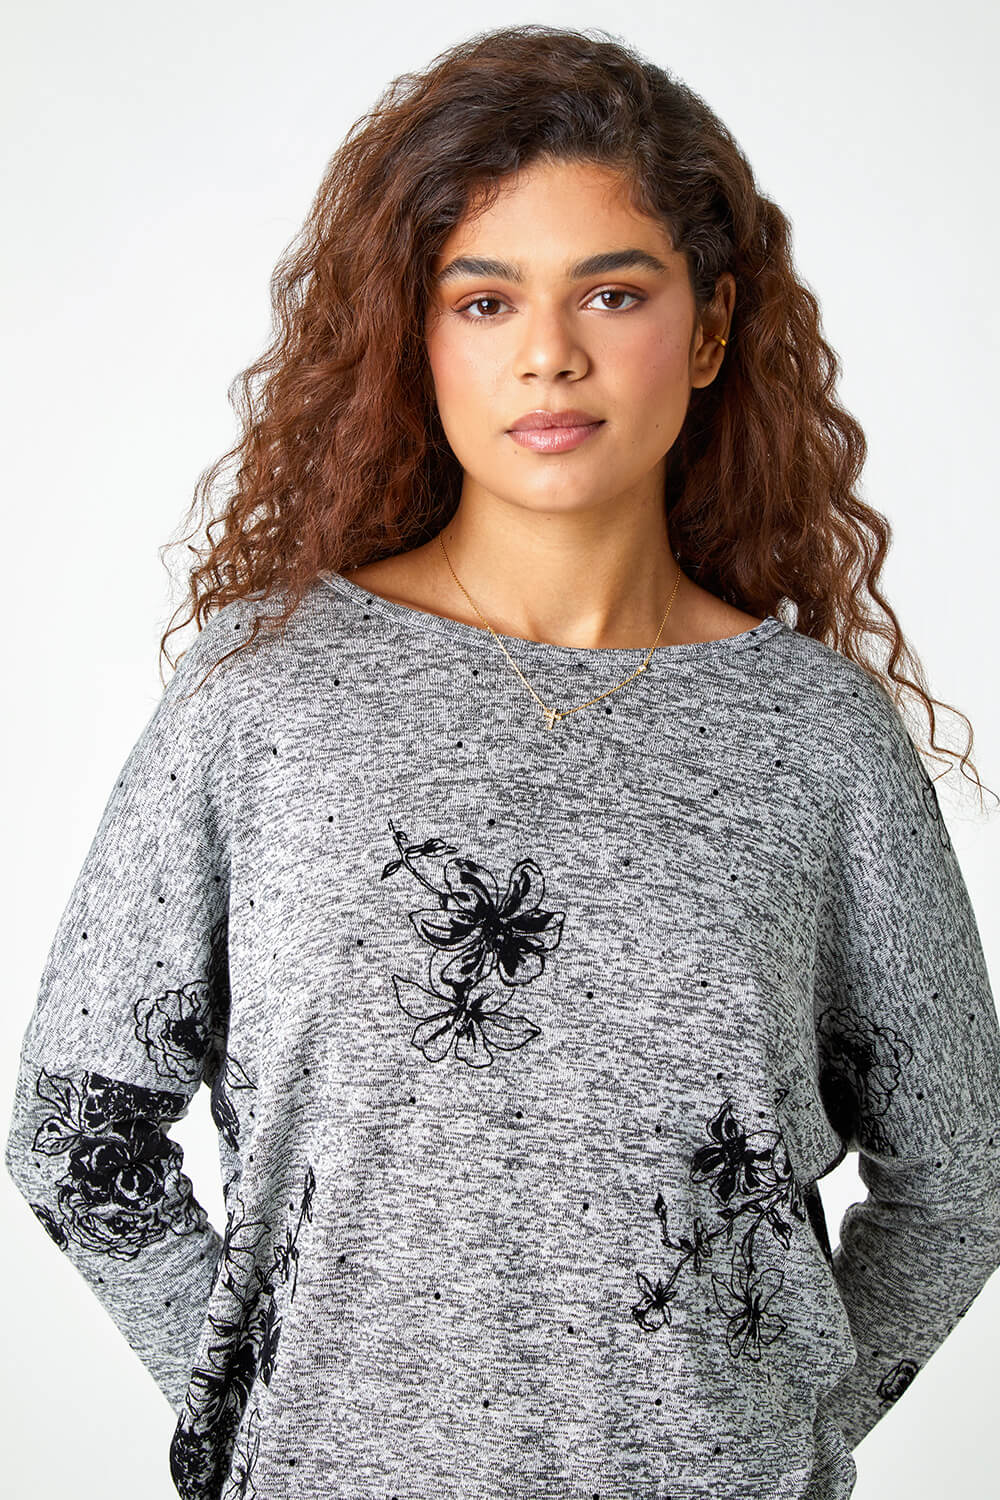 Grey Textured Floral Print Stretch Top, Image 4 of 5